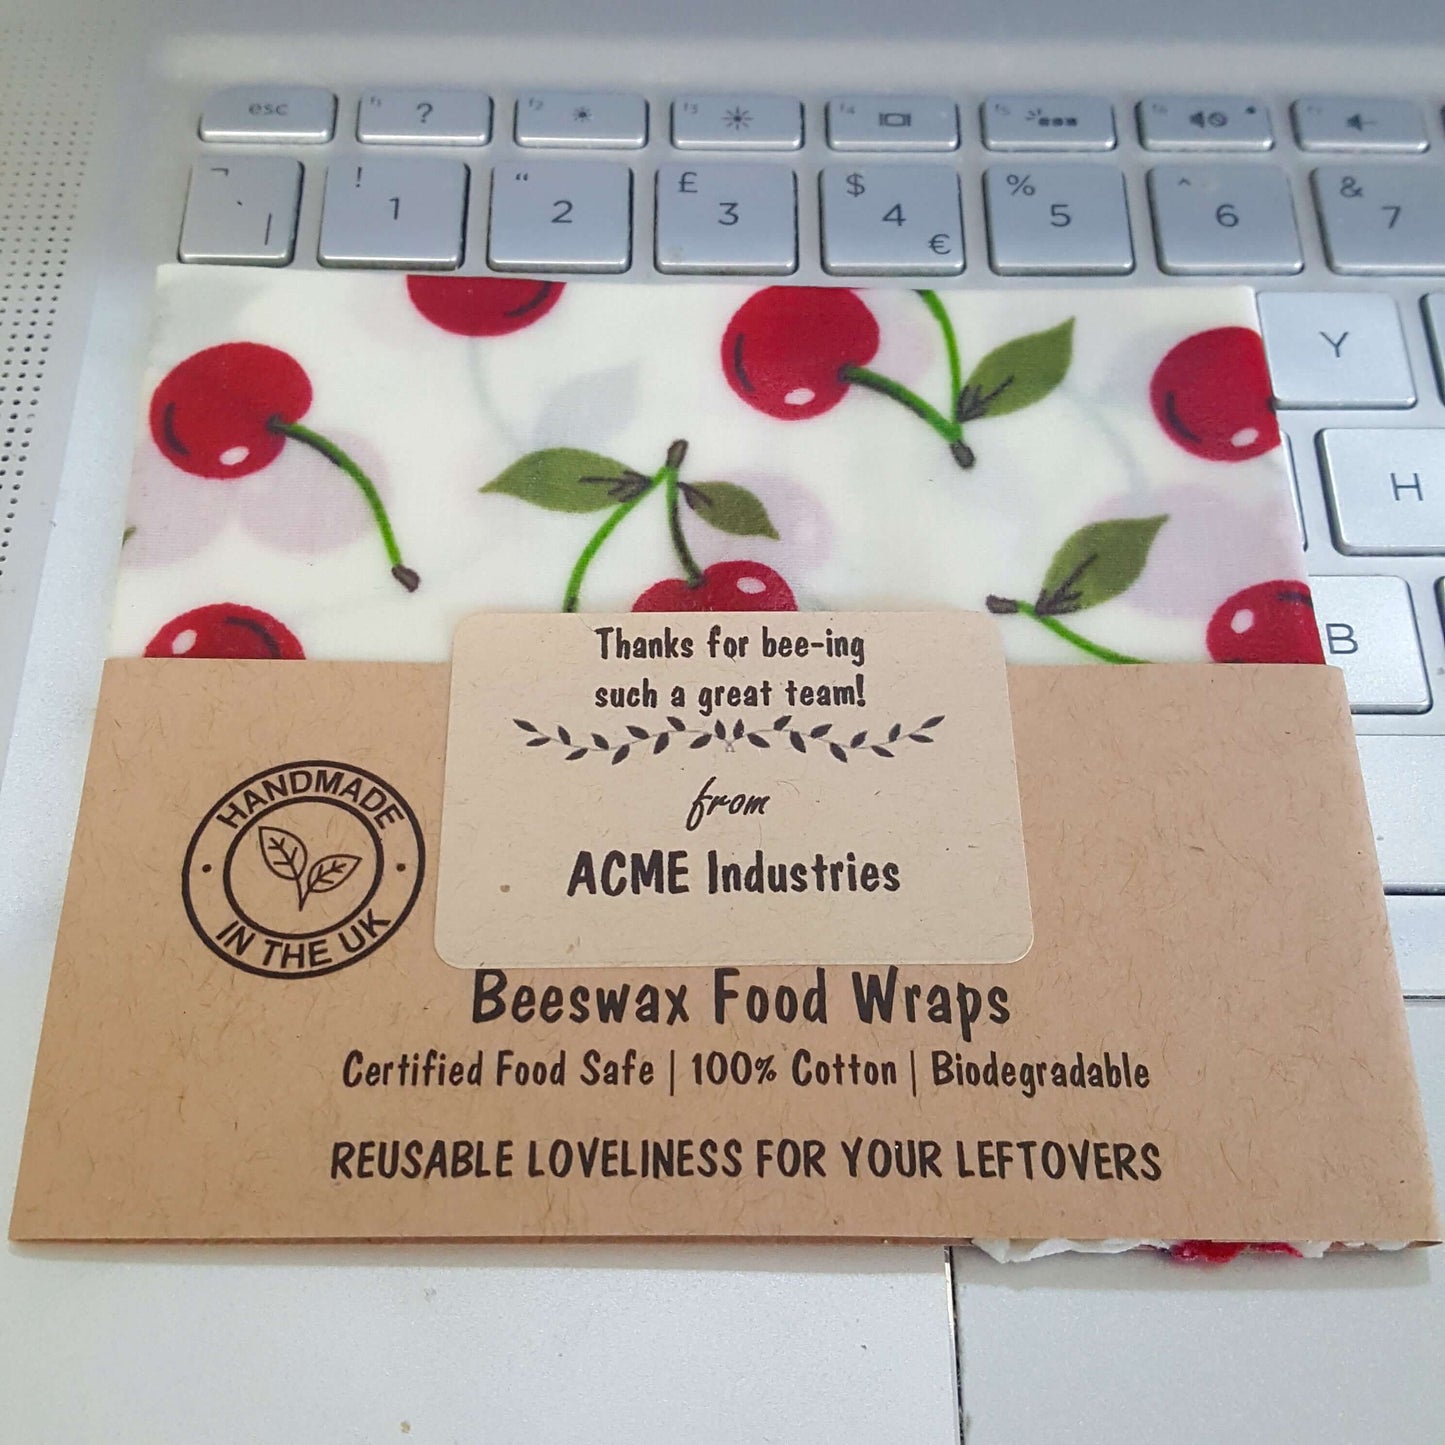 TEN Wholesale Corporate Gifts | Reusable Beeswax Food Wrap